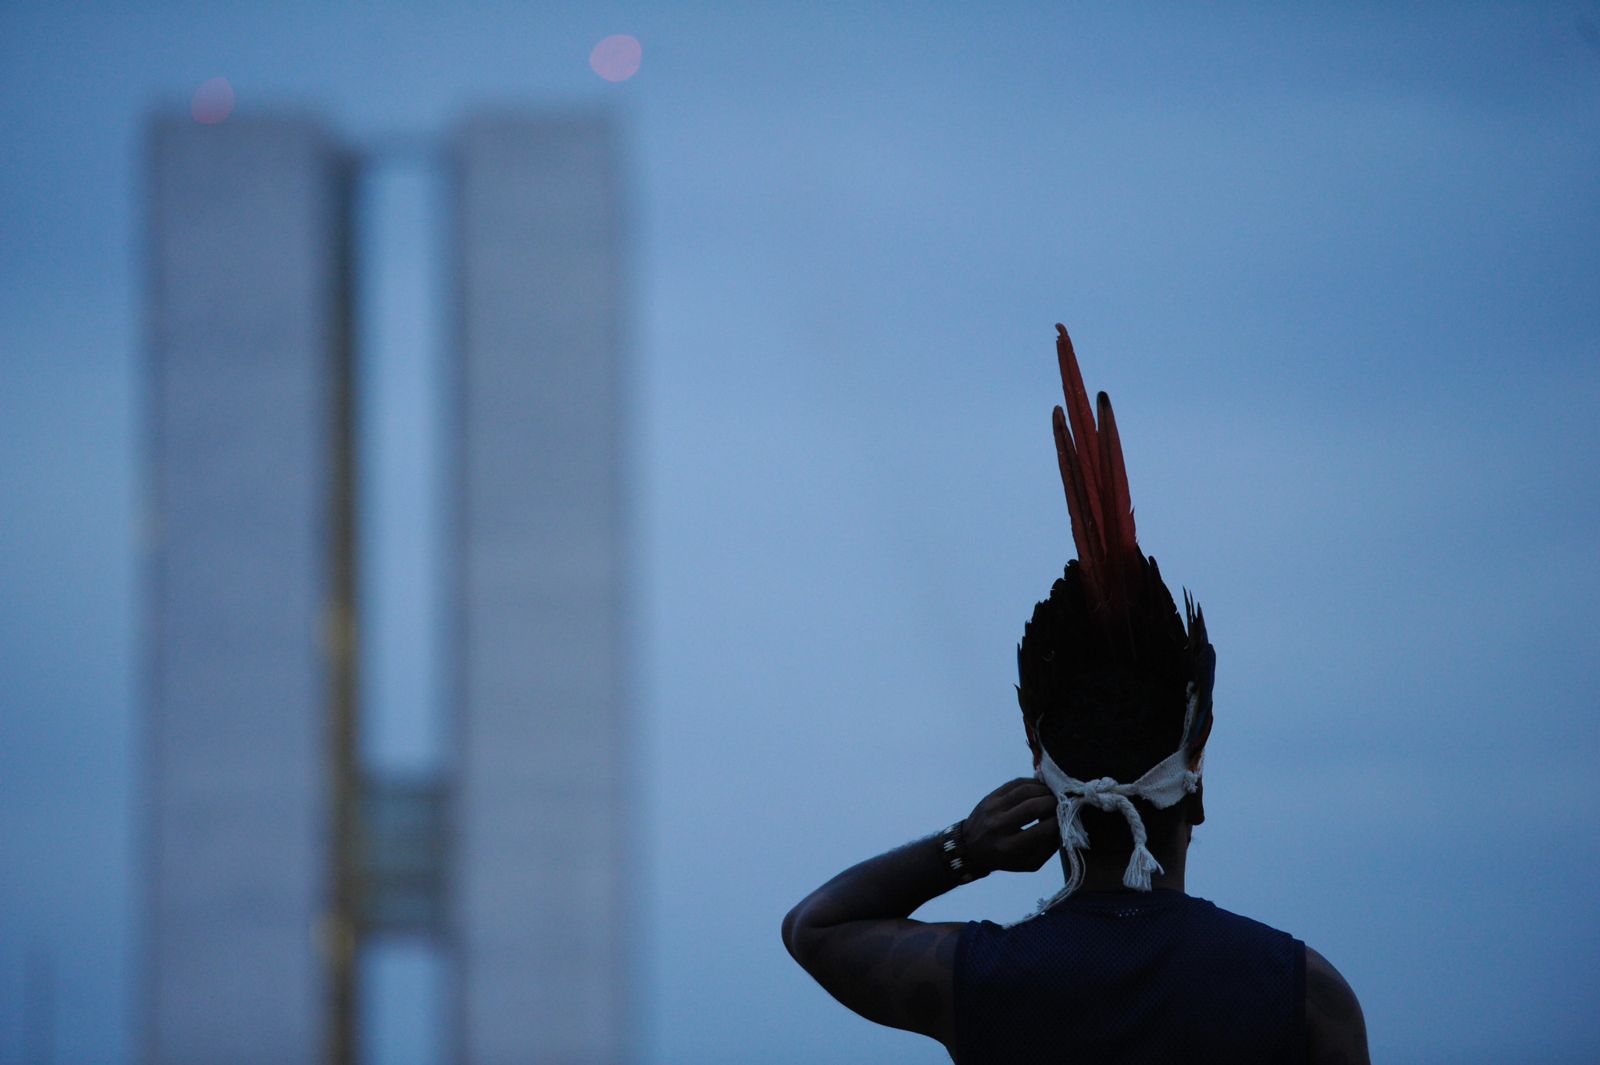 Why do high-income Brazilians distrust human rights?